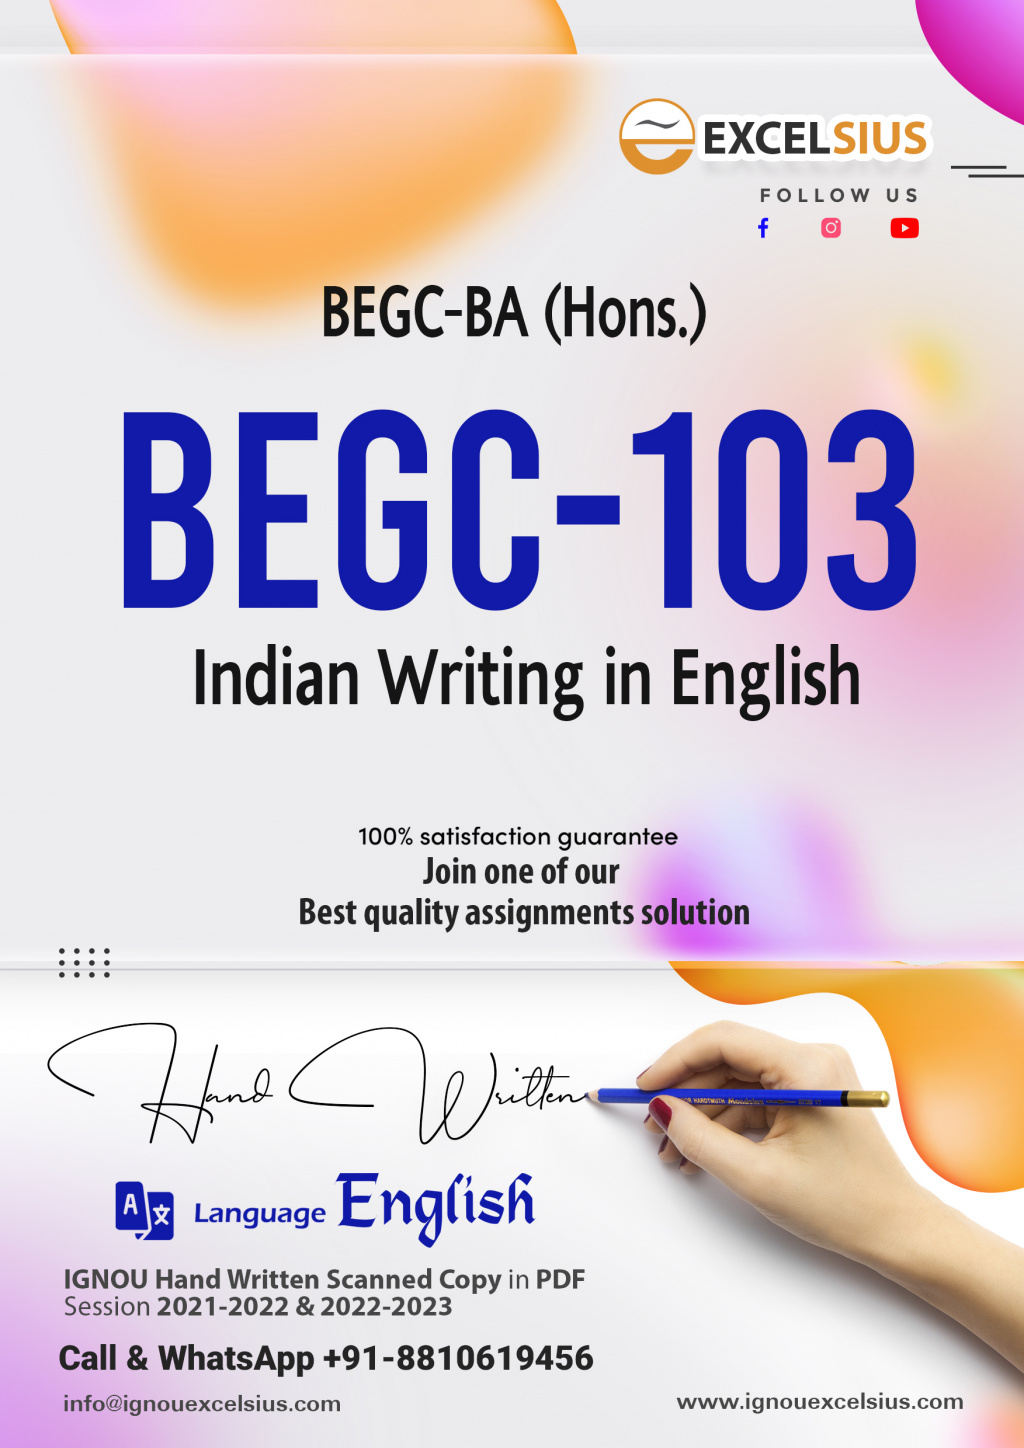 IGNOU BEGC-103 - Indian Writing in English, Latest Solved Assignment -July 2022 – January 2023